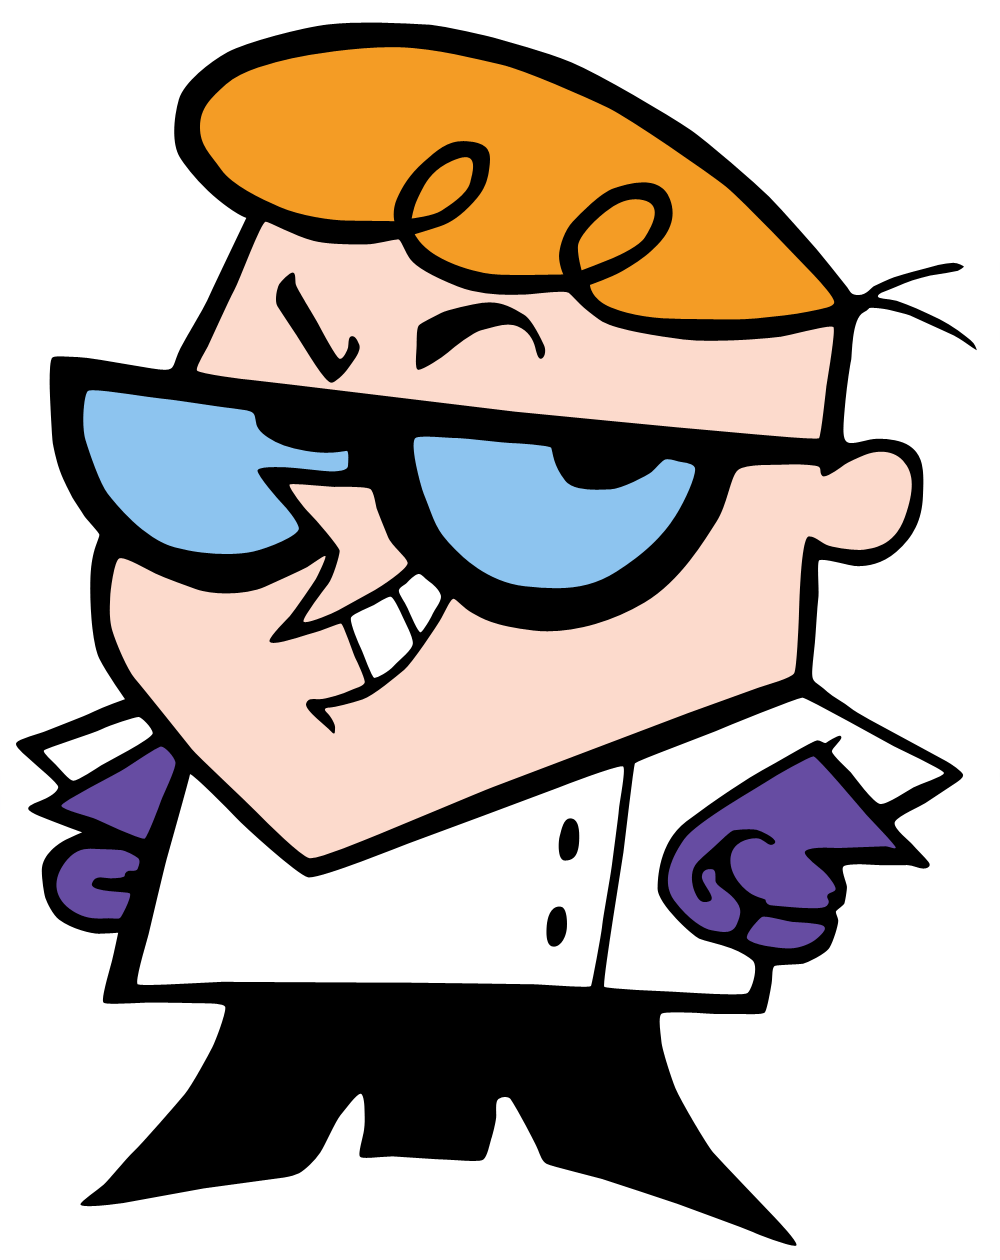 Dexter S Laboratory Hd Wallpapers High Definition